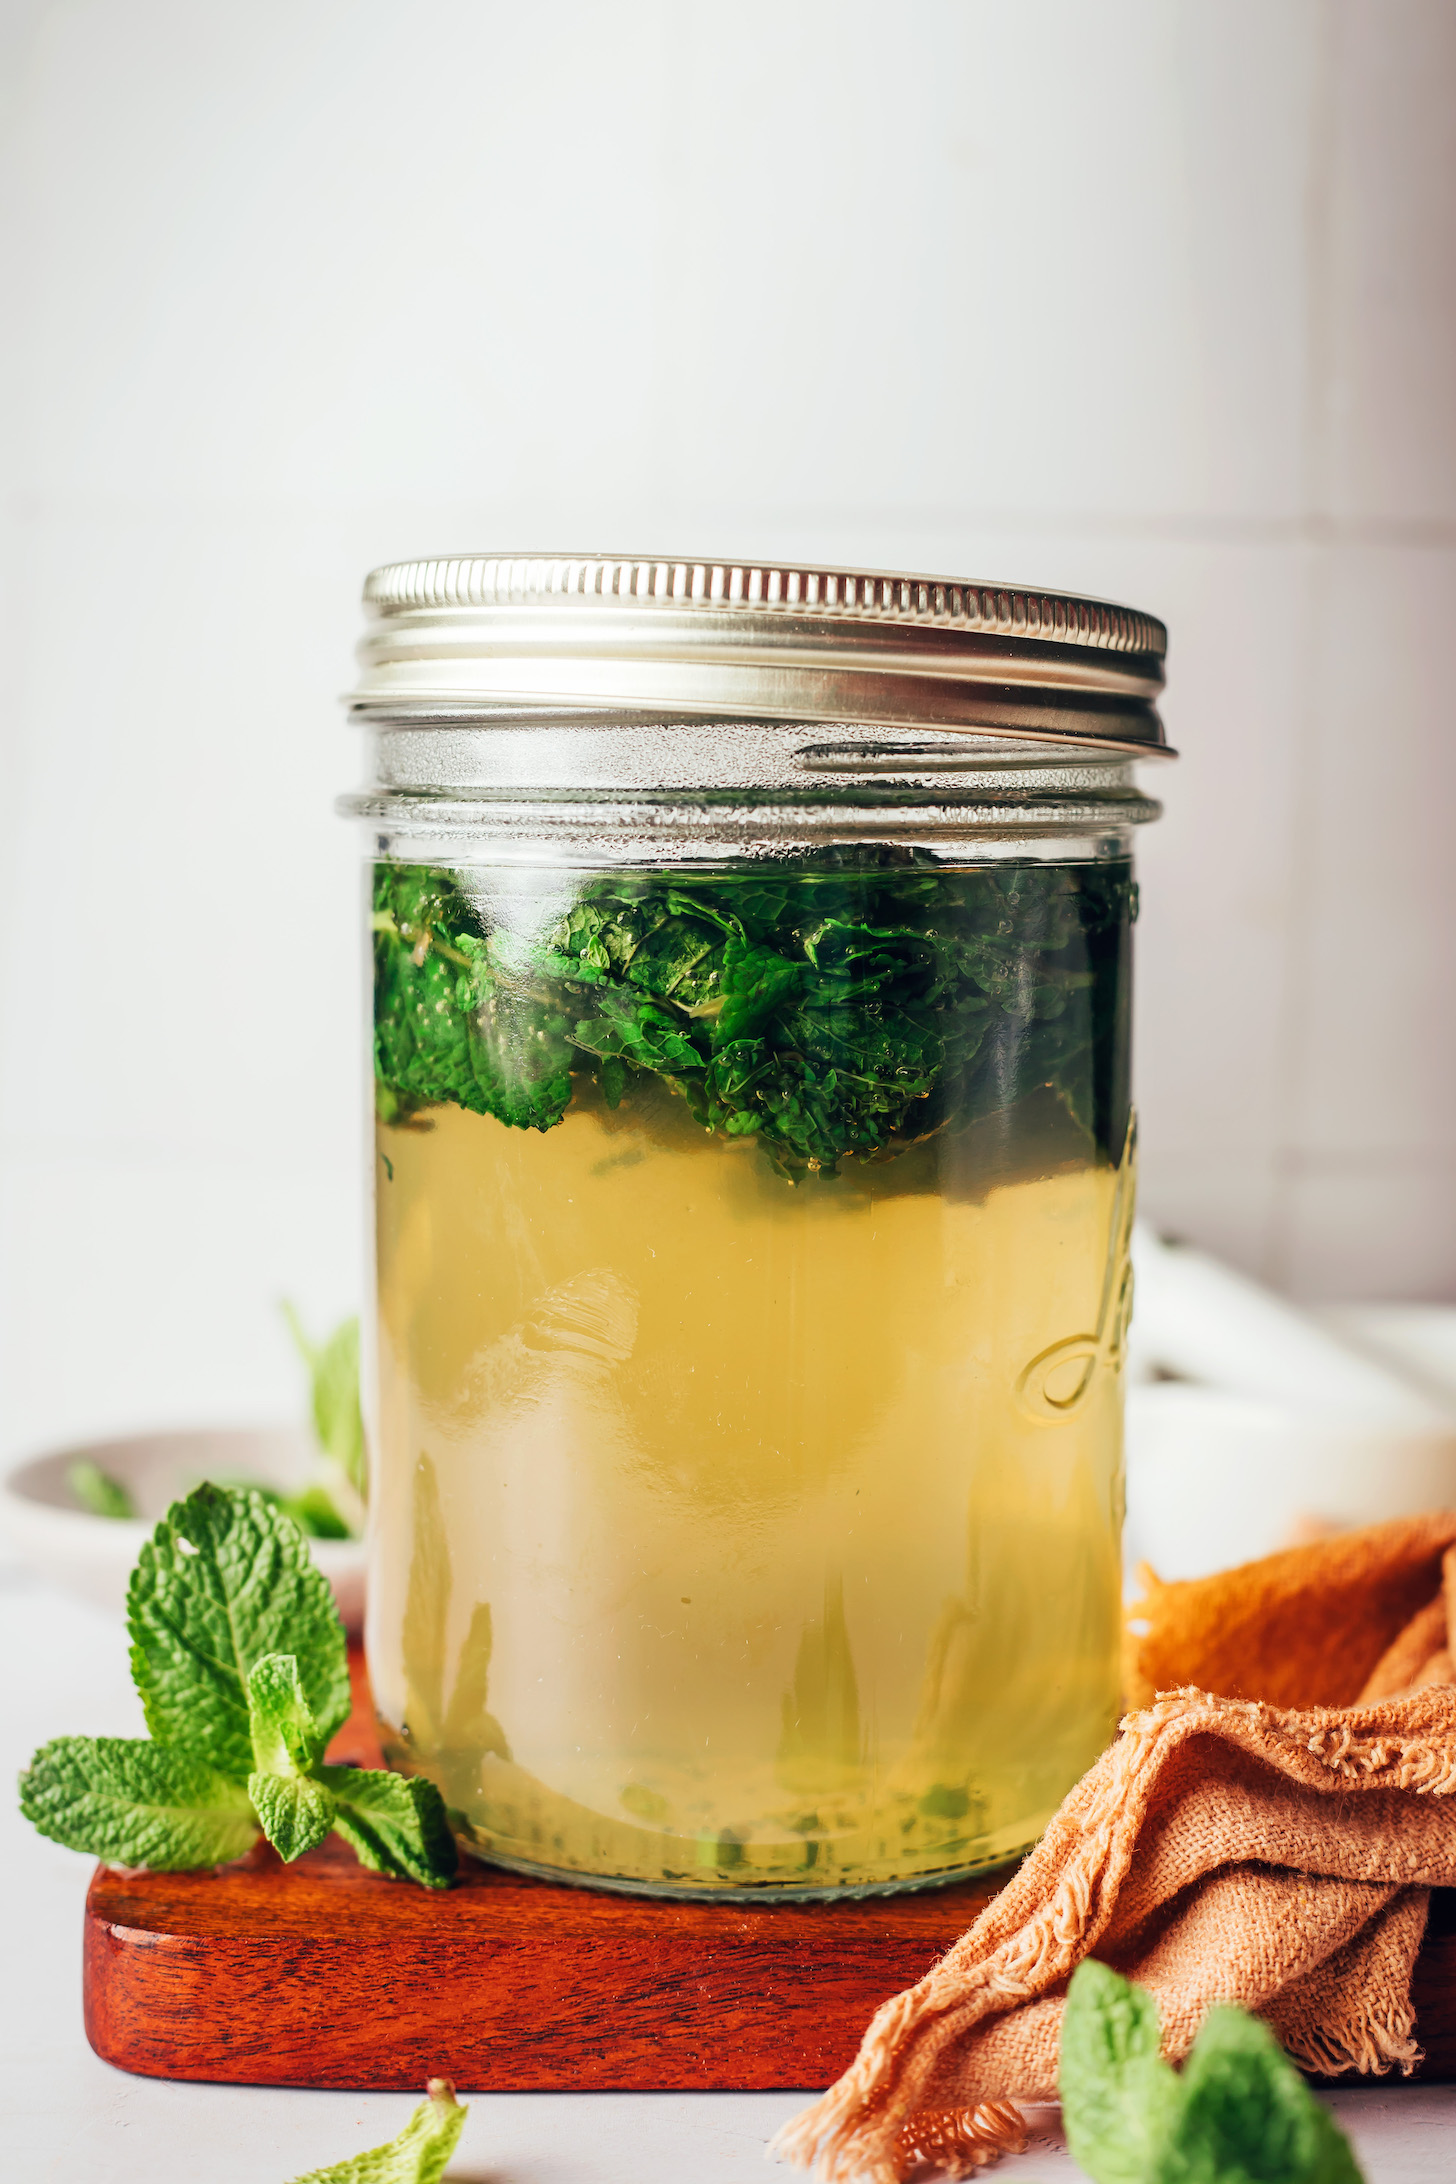 Jar of hot water and muddled mint leaves